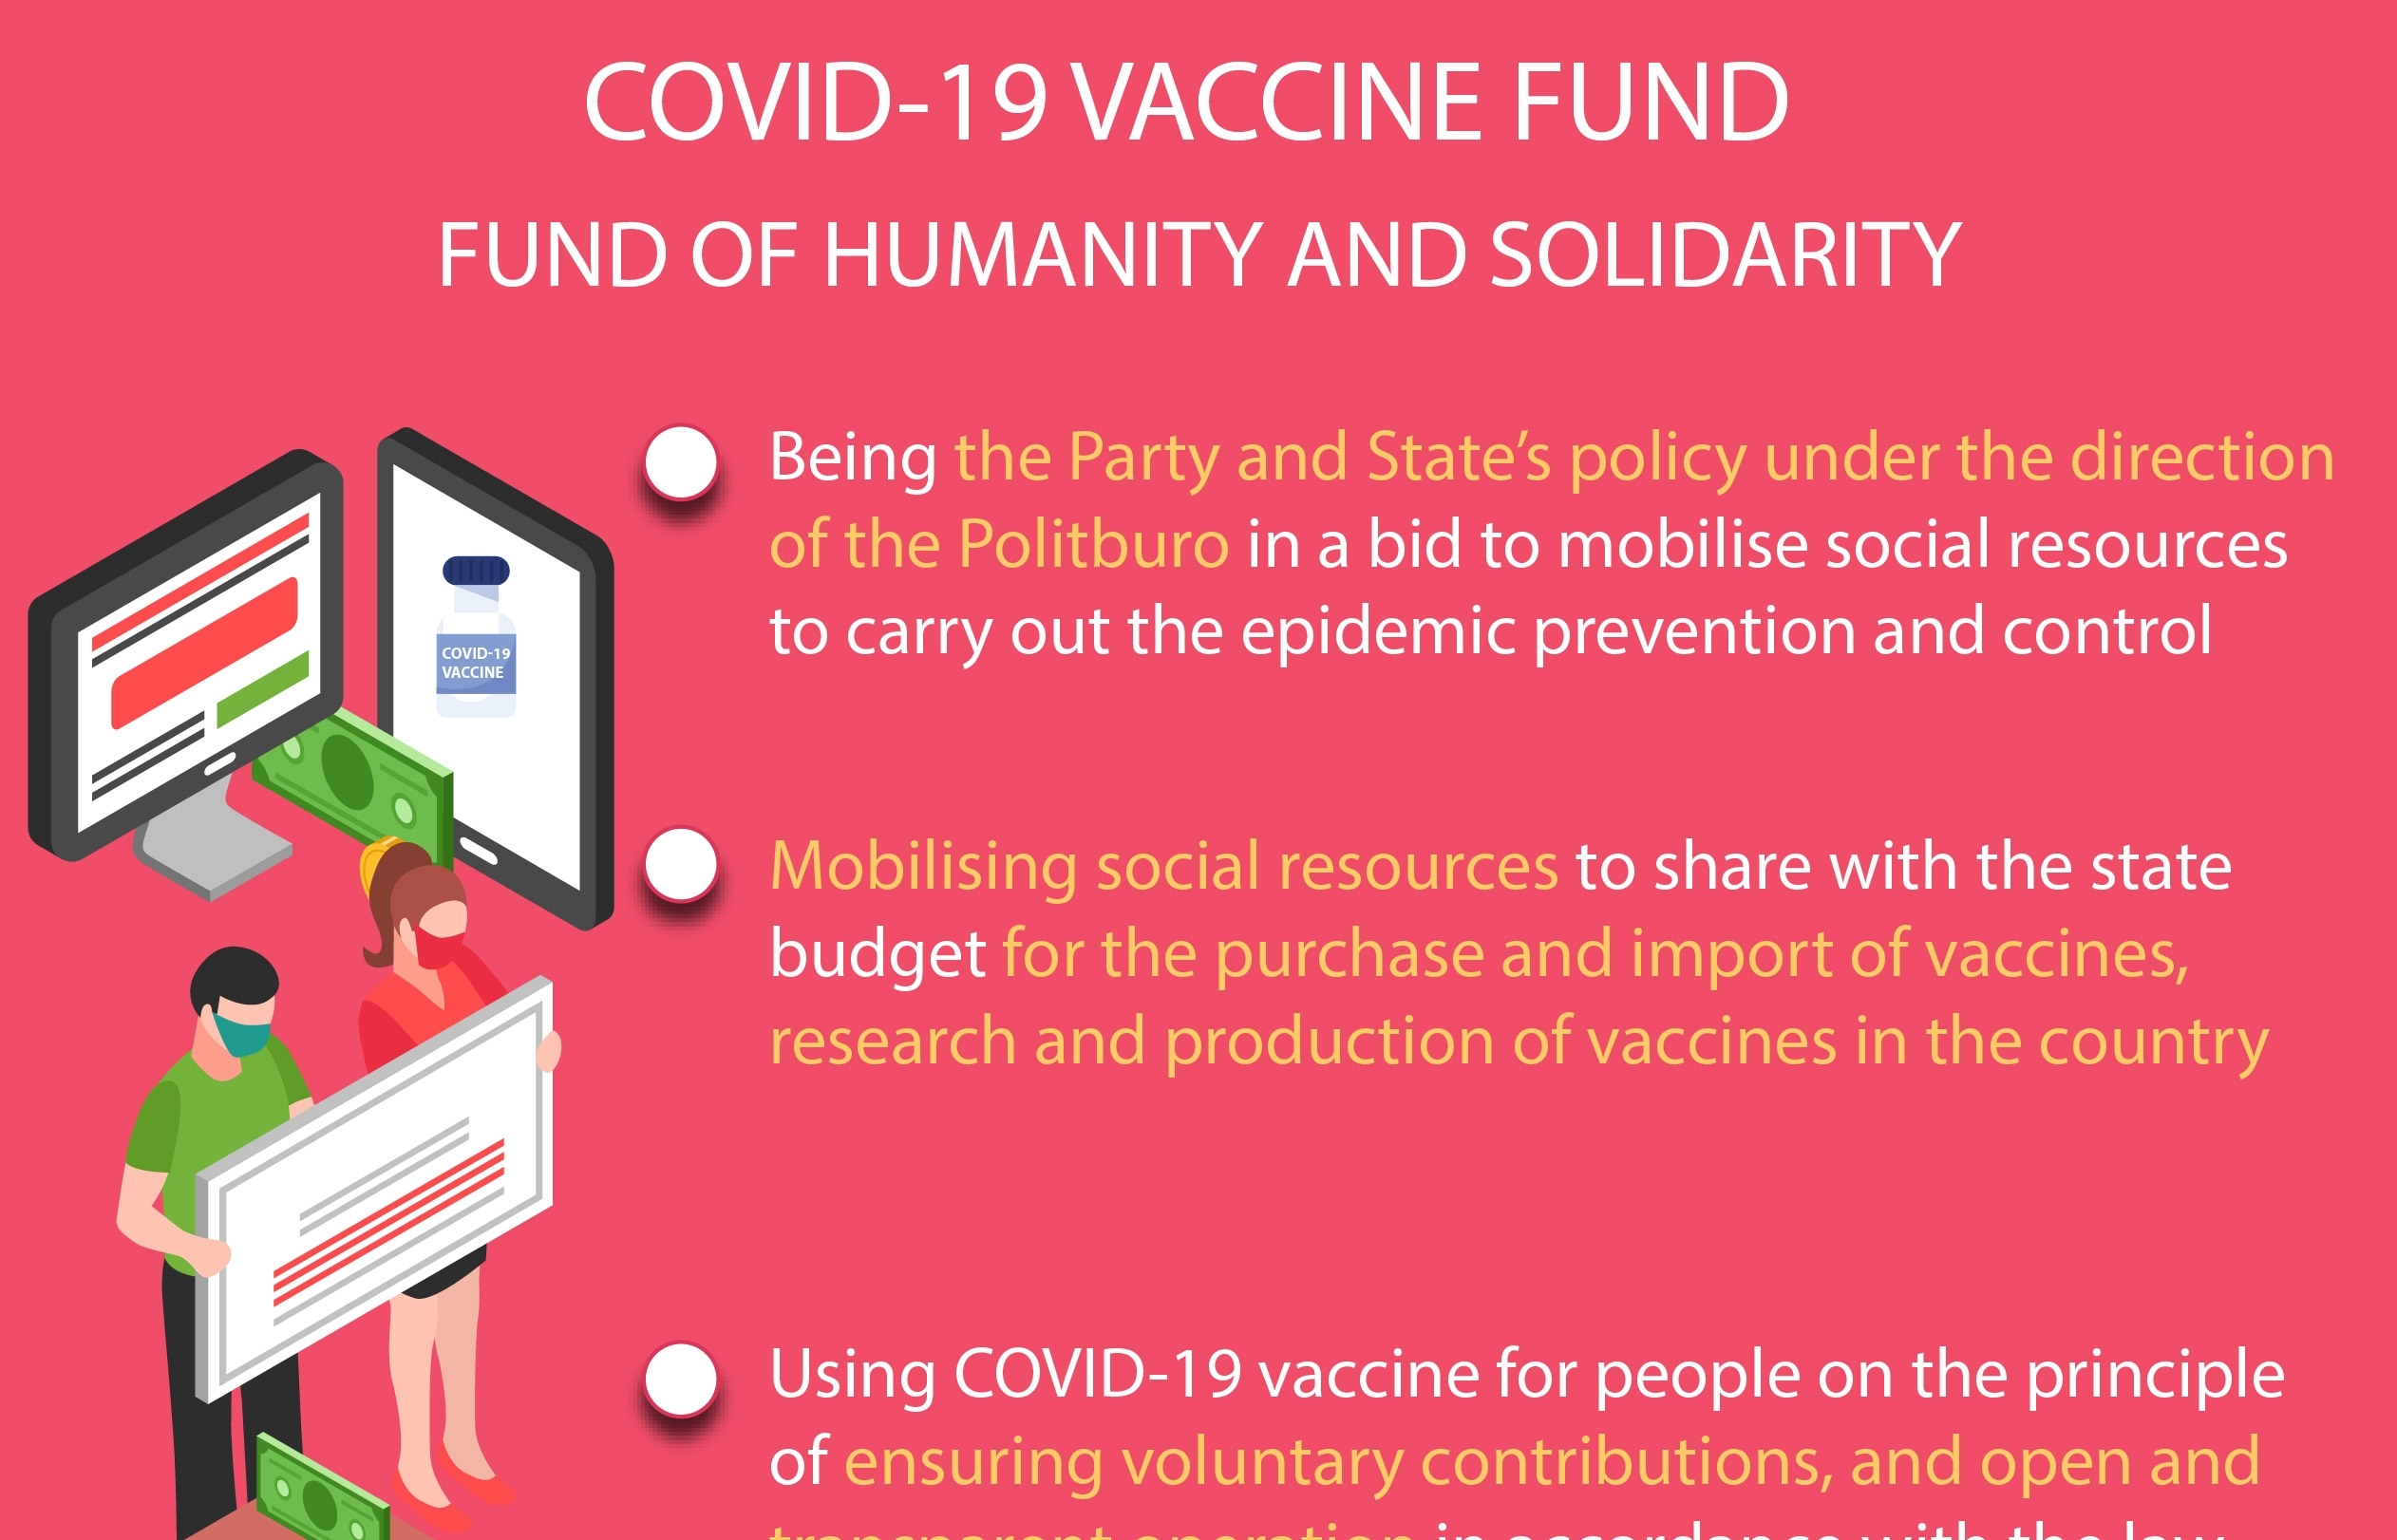 National COVID-19 vaccine fund launched